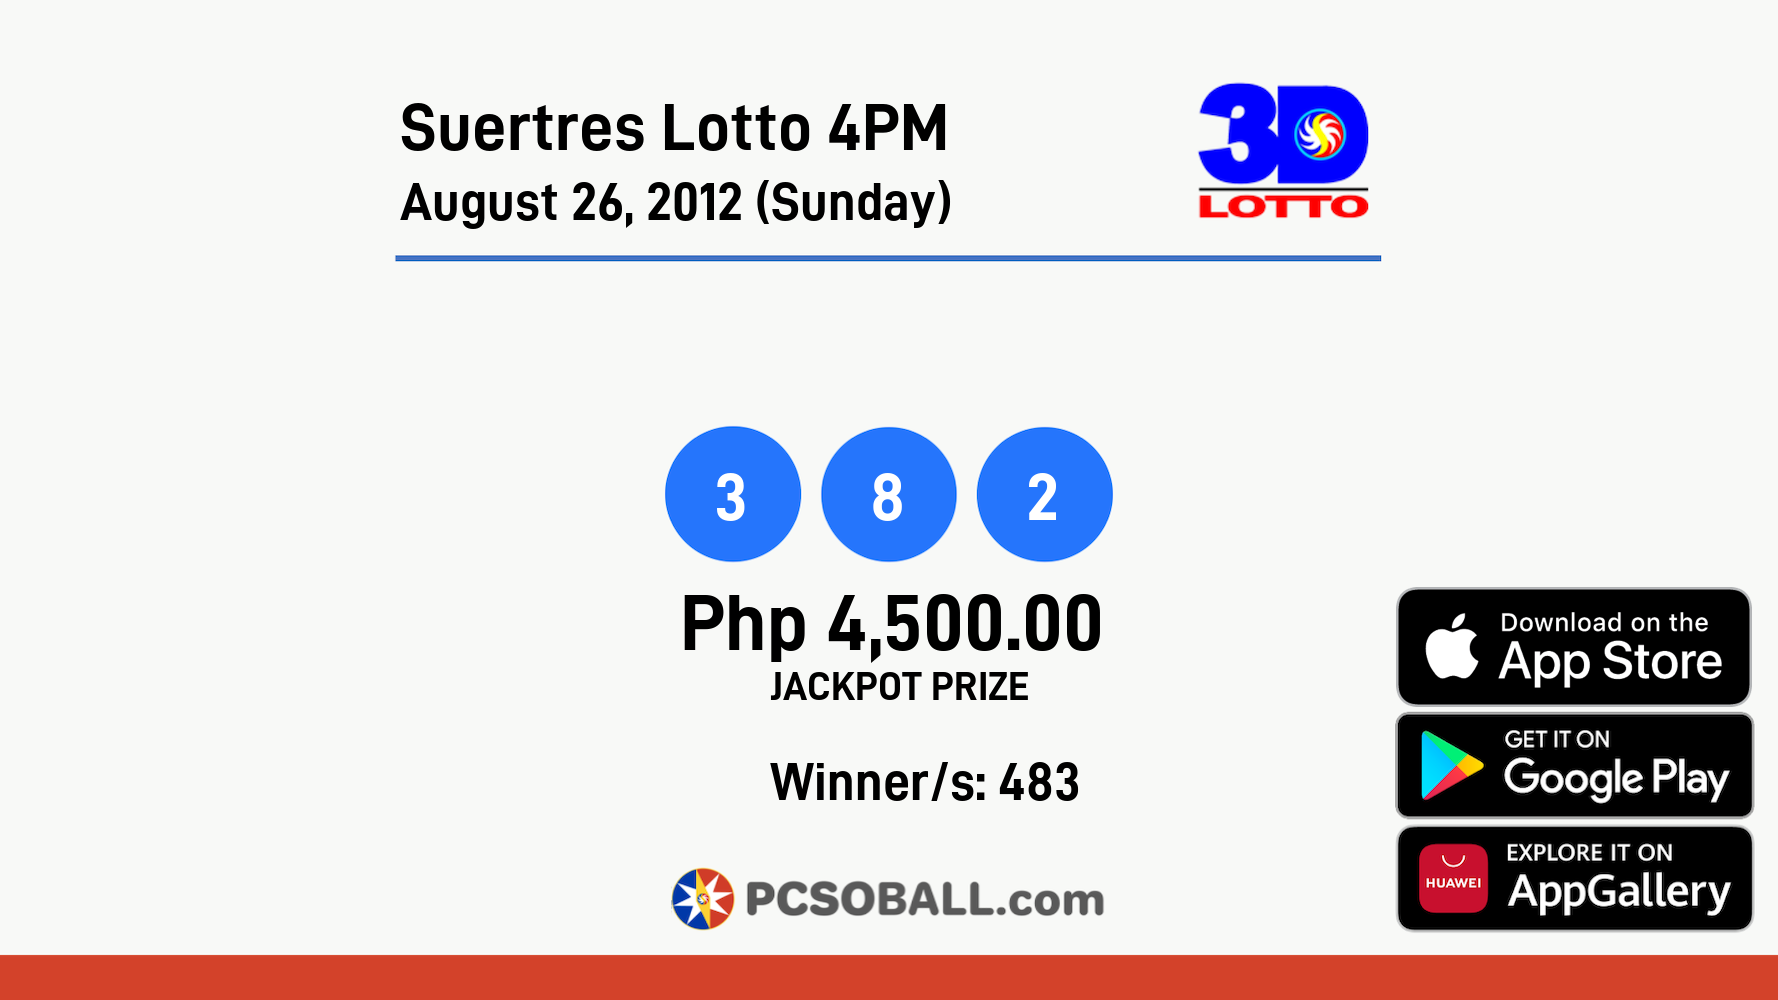 Suertres Lotto 4PM August 26, 2012 (Sunday) Result